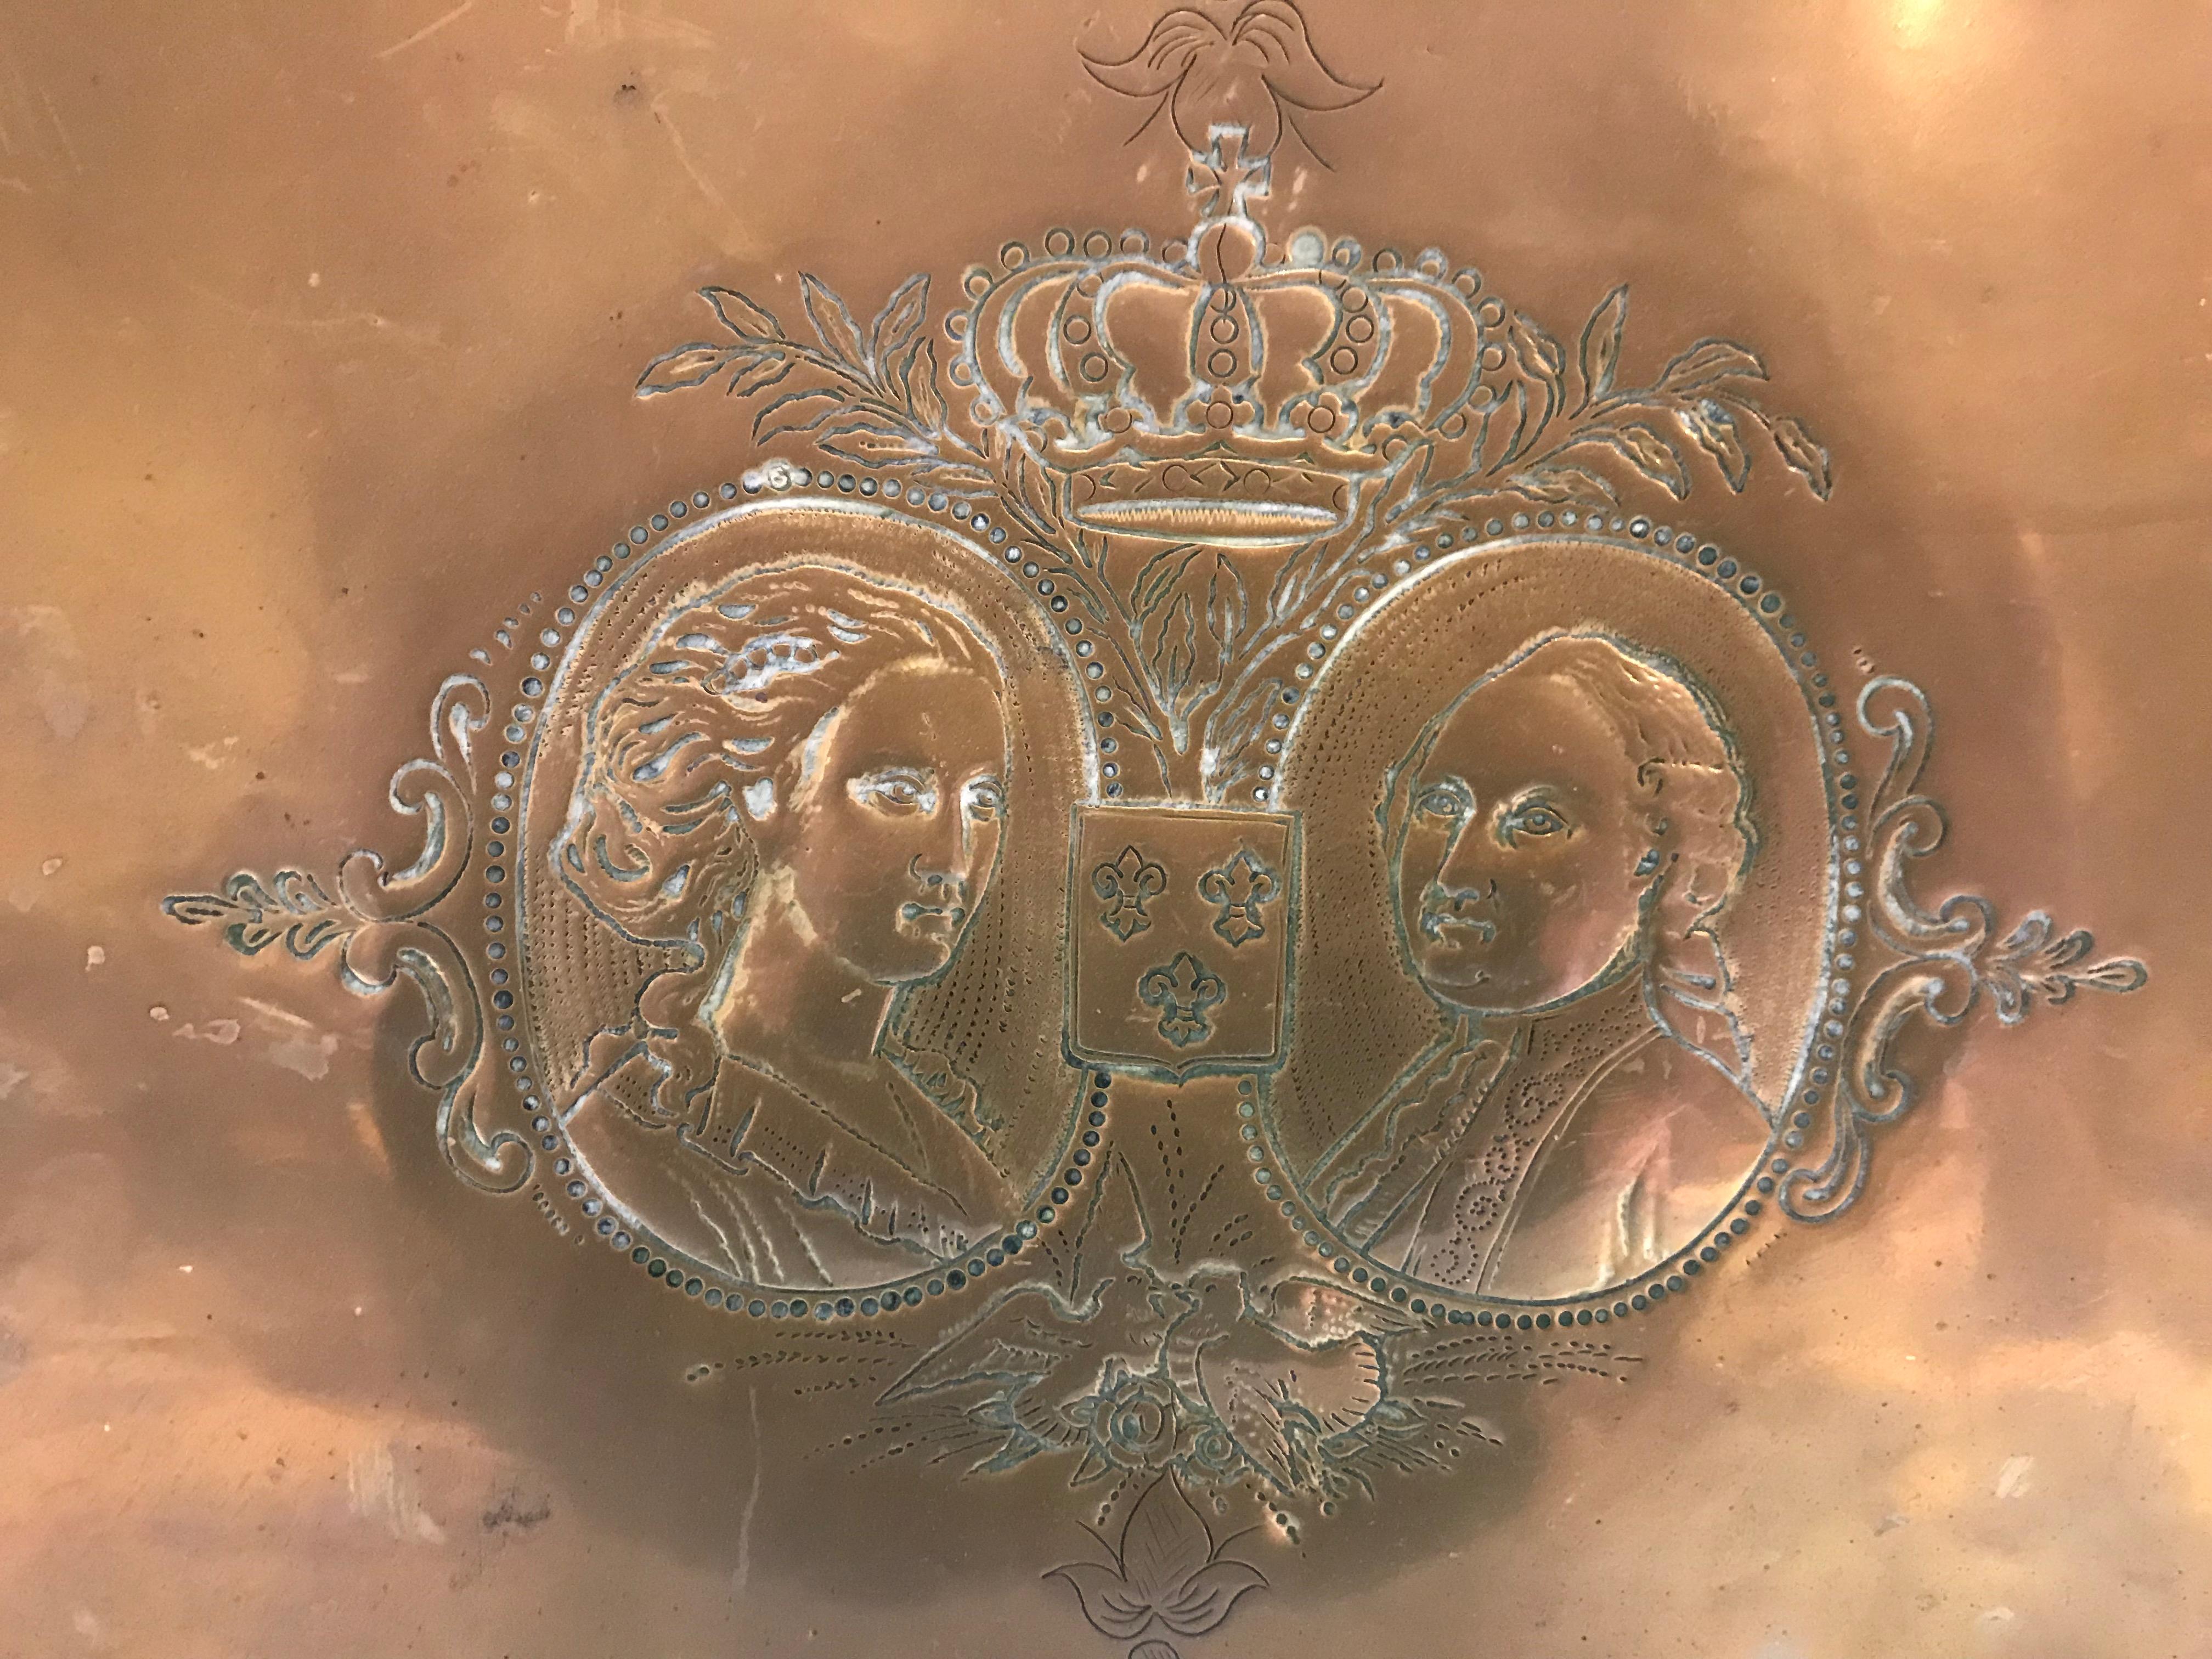 18th century hand chased (or Repoussé) brass tray commemorating the marriage of King George II’s(England) eldest daughter Princess Anne to William IV, Prince of Orange,(Netherlands) in 1734.
The wedding was highly celebrated and inspired the